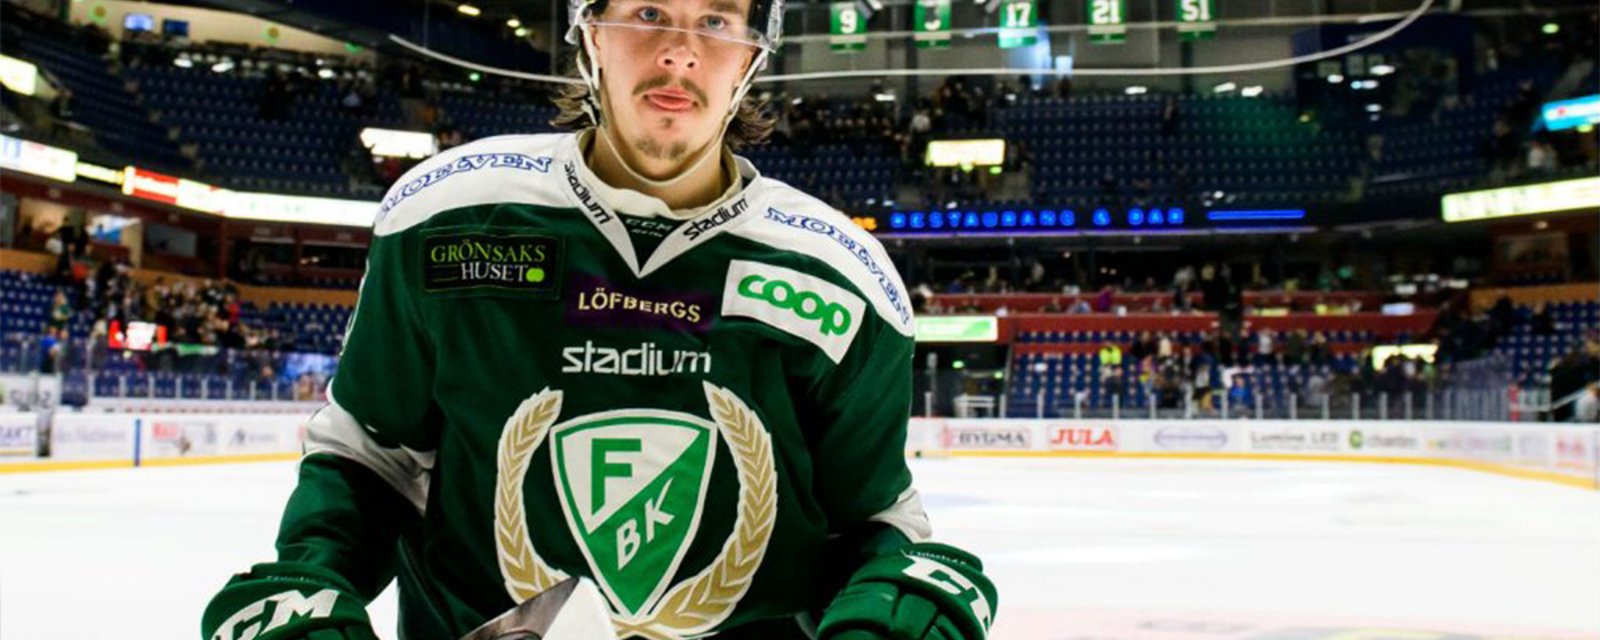 Report: Two Canadian teams “in hard” trying to sign Swedish star Joakim Nygard